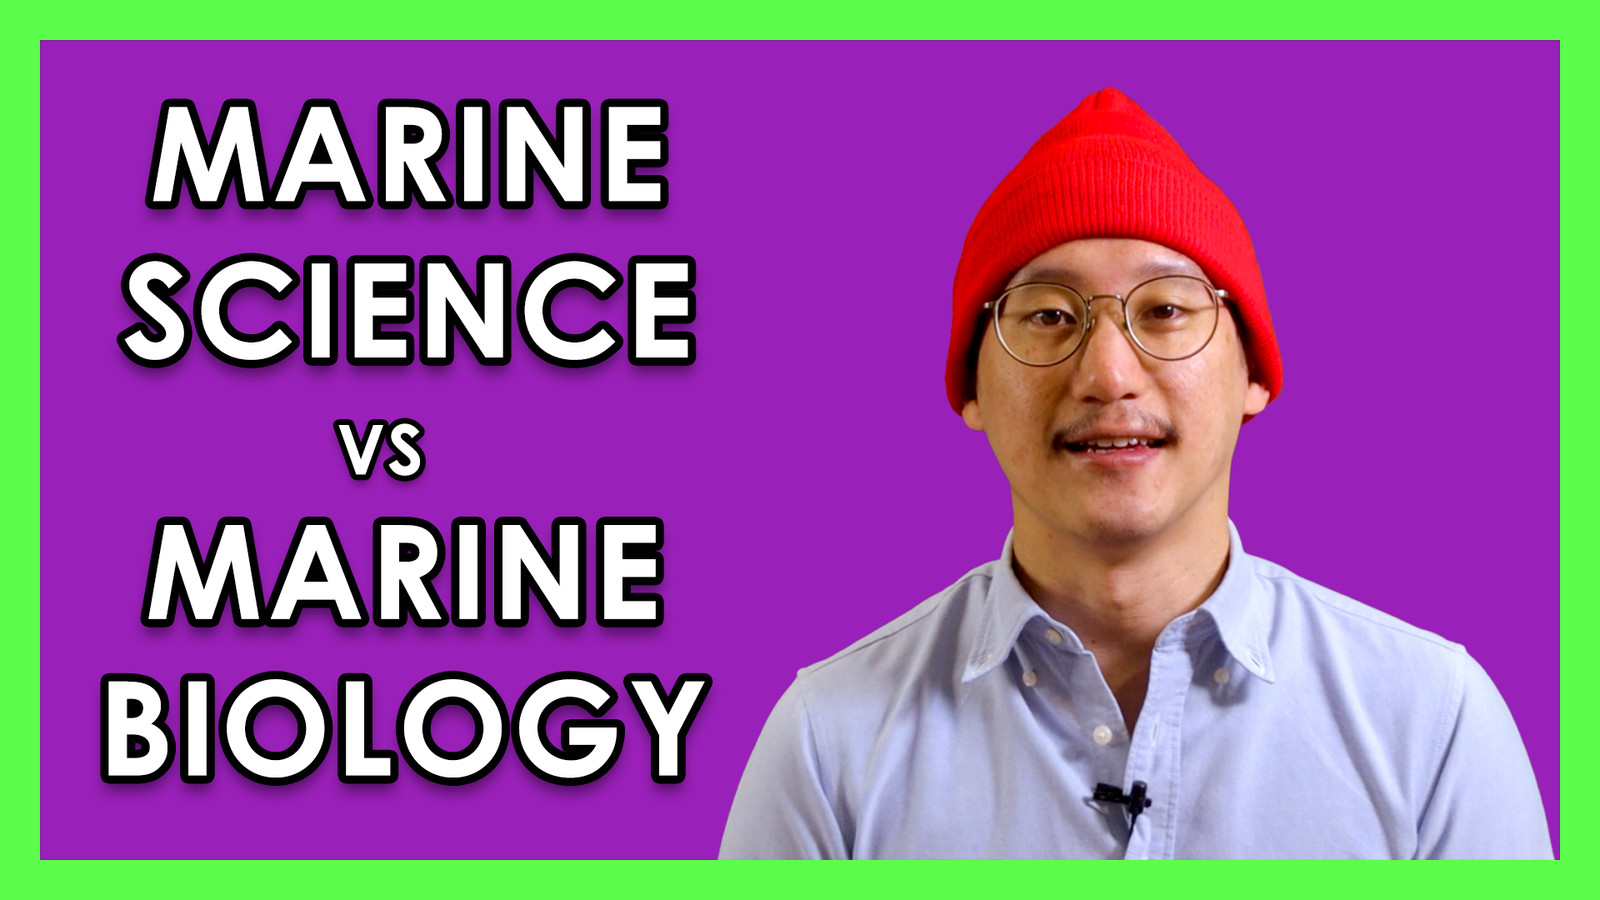 What's the Difference Between Studying Marine Science and Marine Biology?